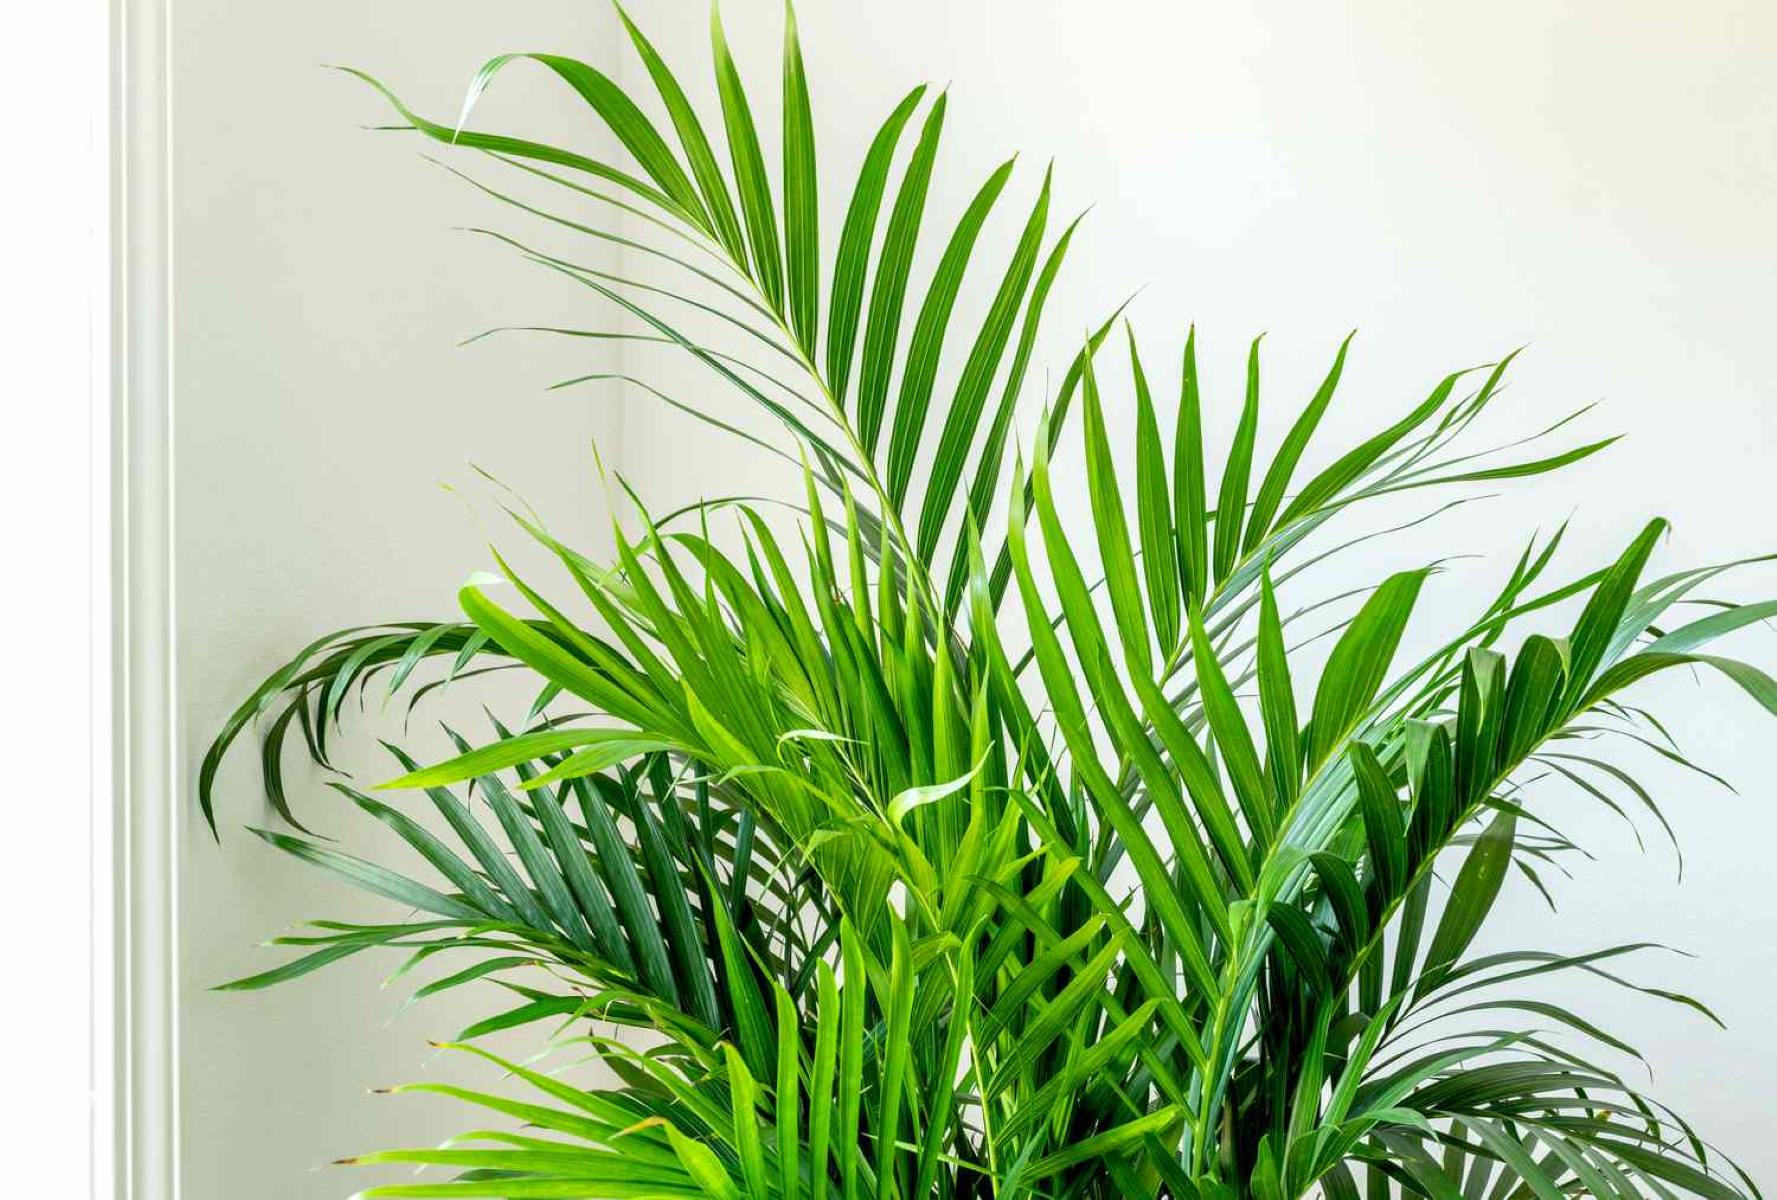 Revive Your Dying Cat Palm Plant With These Genius Tips!